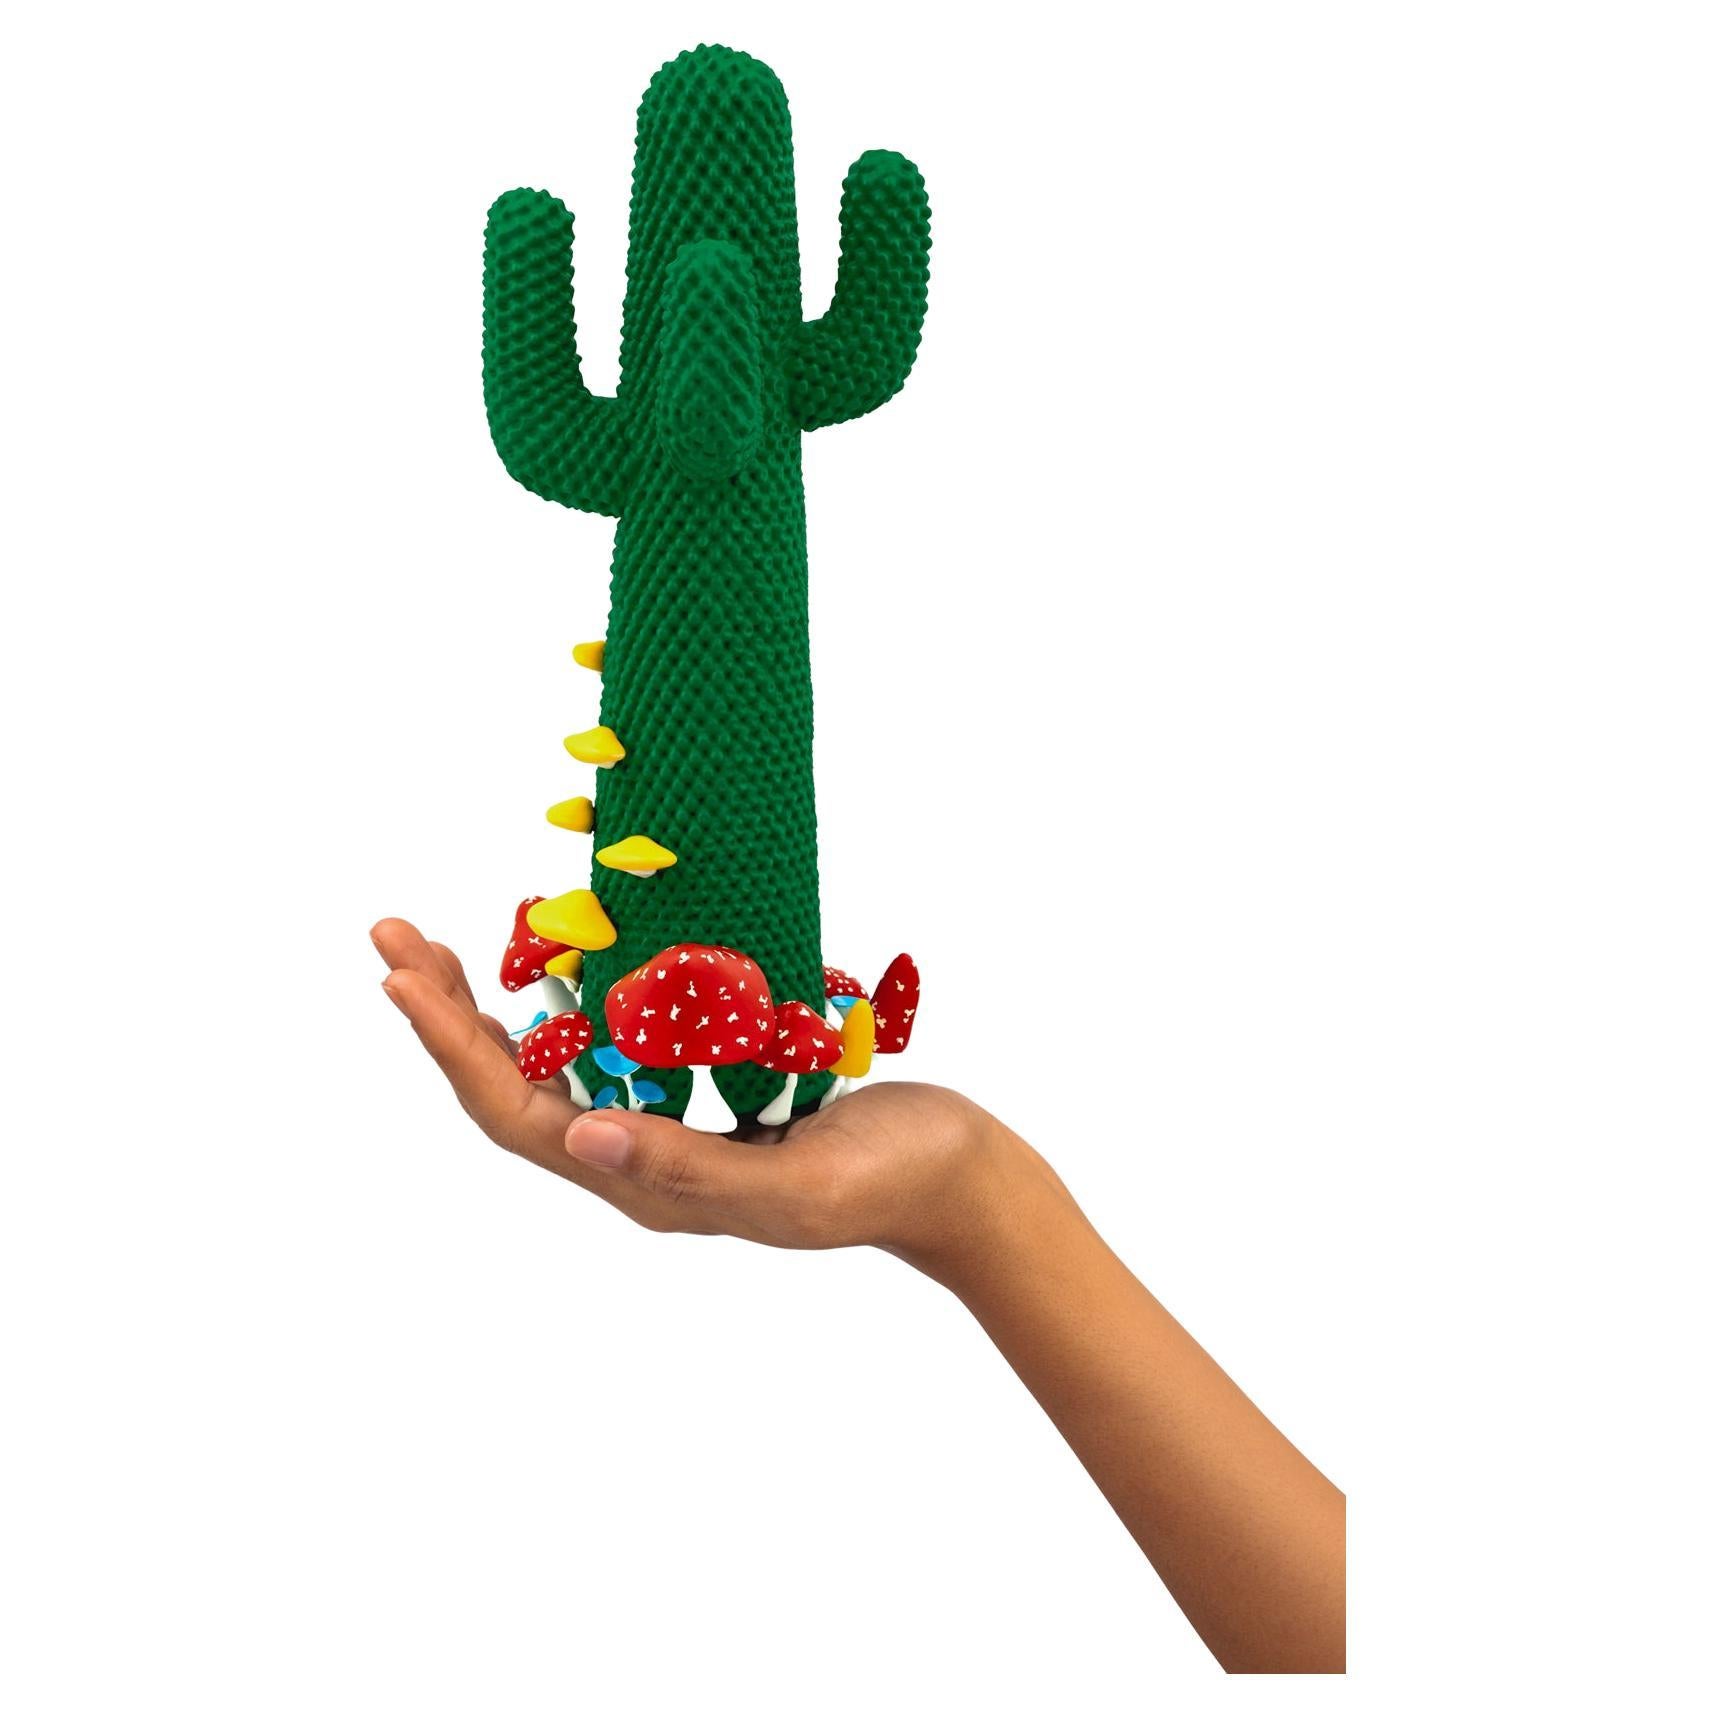 LIMITED EDITION #81/99

Gufram presents the miniaturised version of the Shroom CACTUS® created in collaboration with A$AP Rocky and the artist’s new design studio HOMMEMADE Exactly as the real-size Shroom CACTUS®, the new Guframini piece features